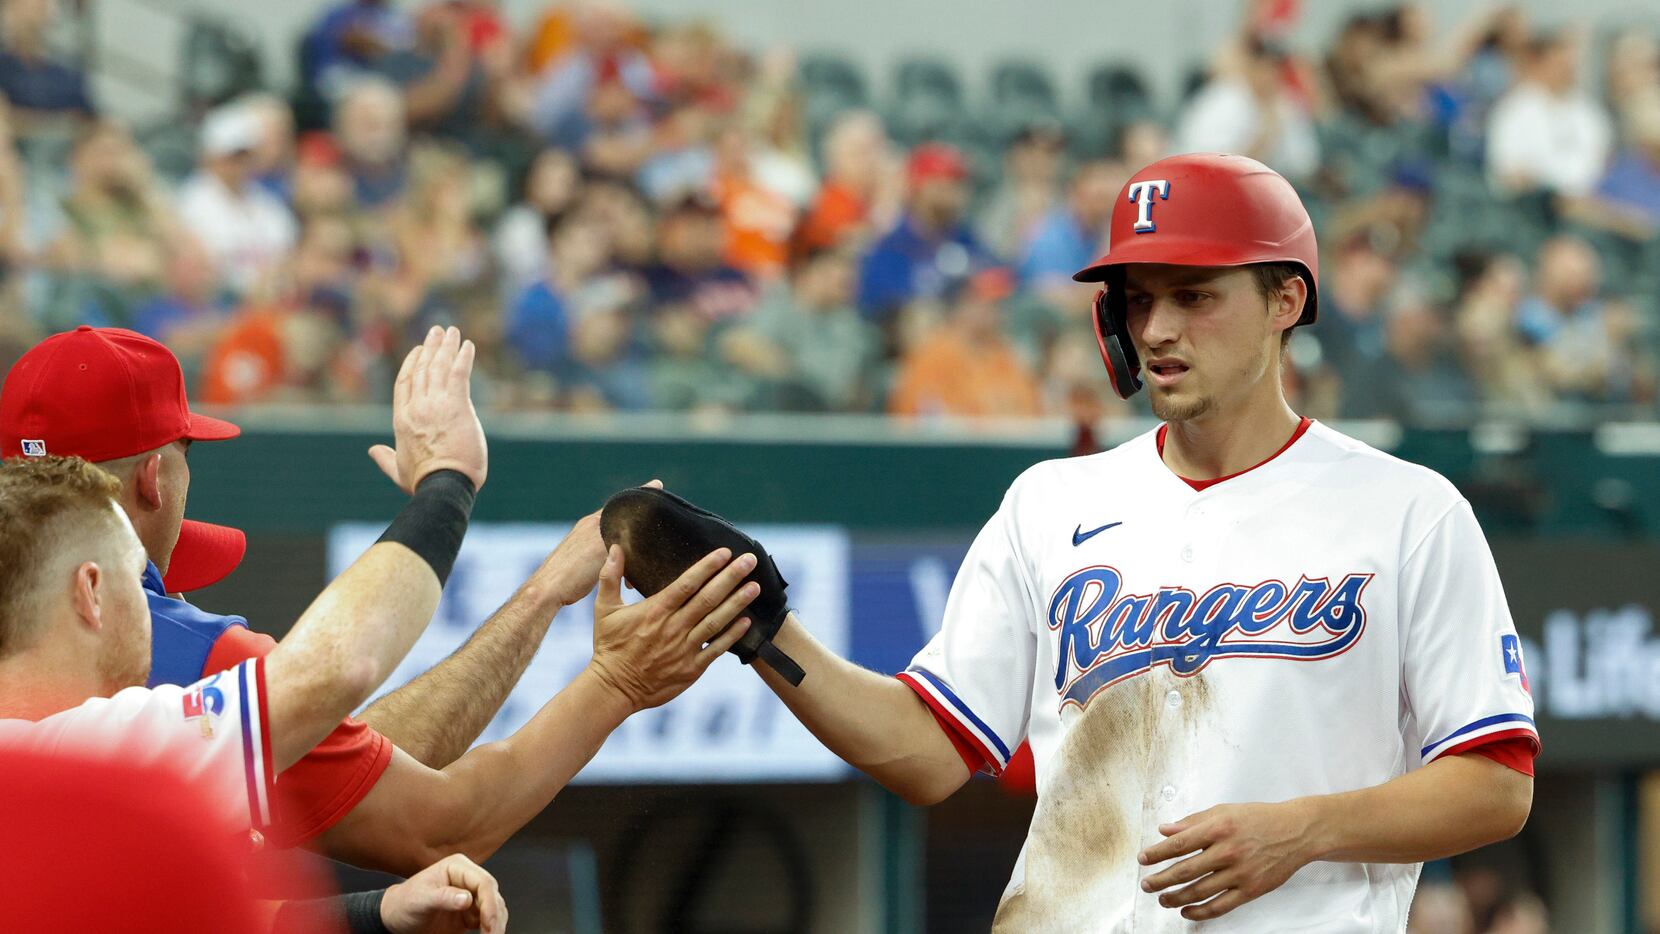 After an unfamiliar debut with Rangers, Corey Seager is ready for